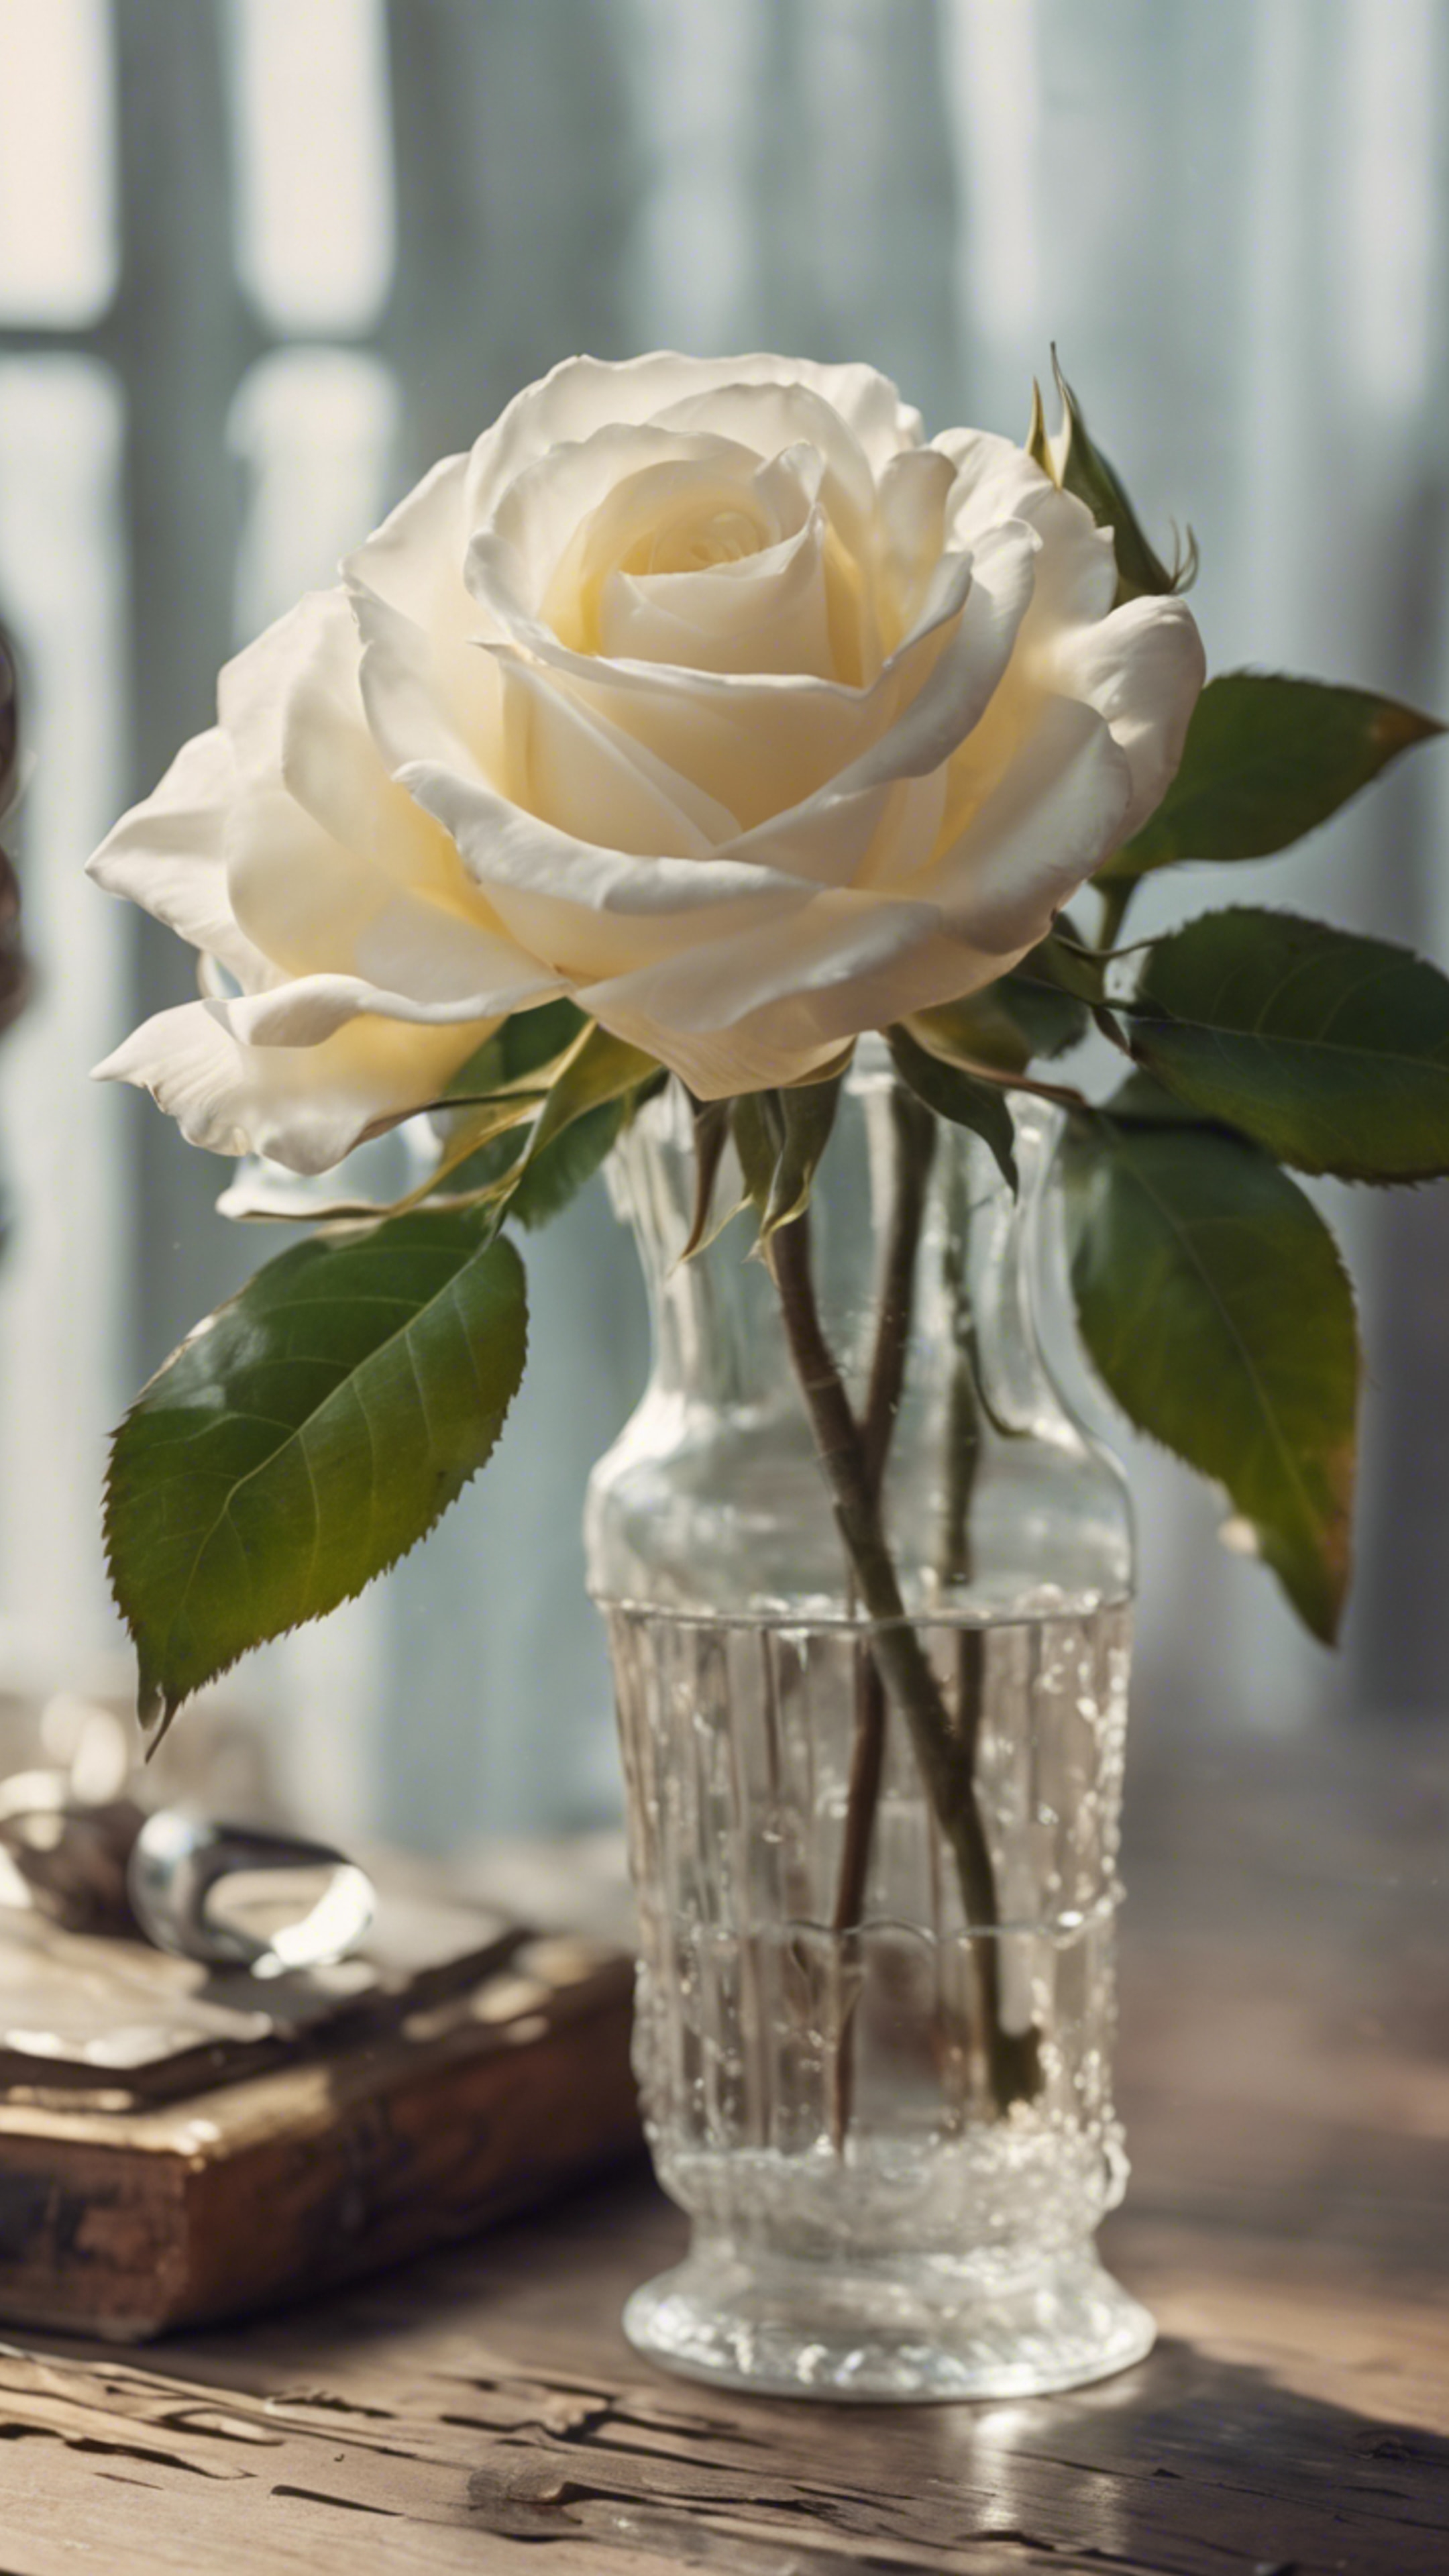 A soft white rose in a vintage glass vase on an antique wooden table.壁紙[fc4486b9e2ee4669bbfe]